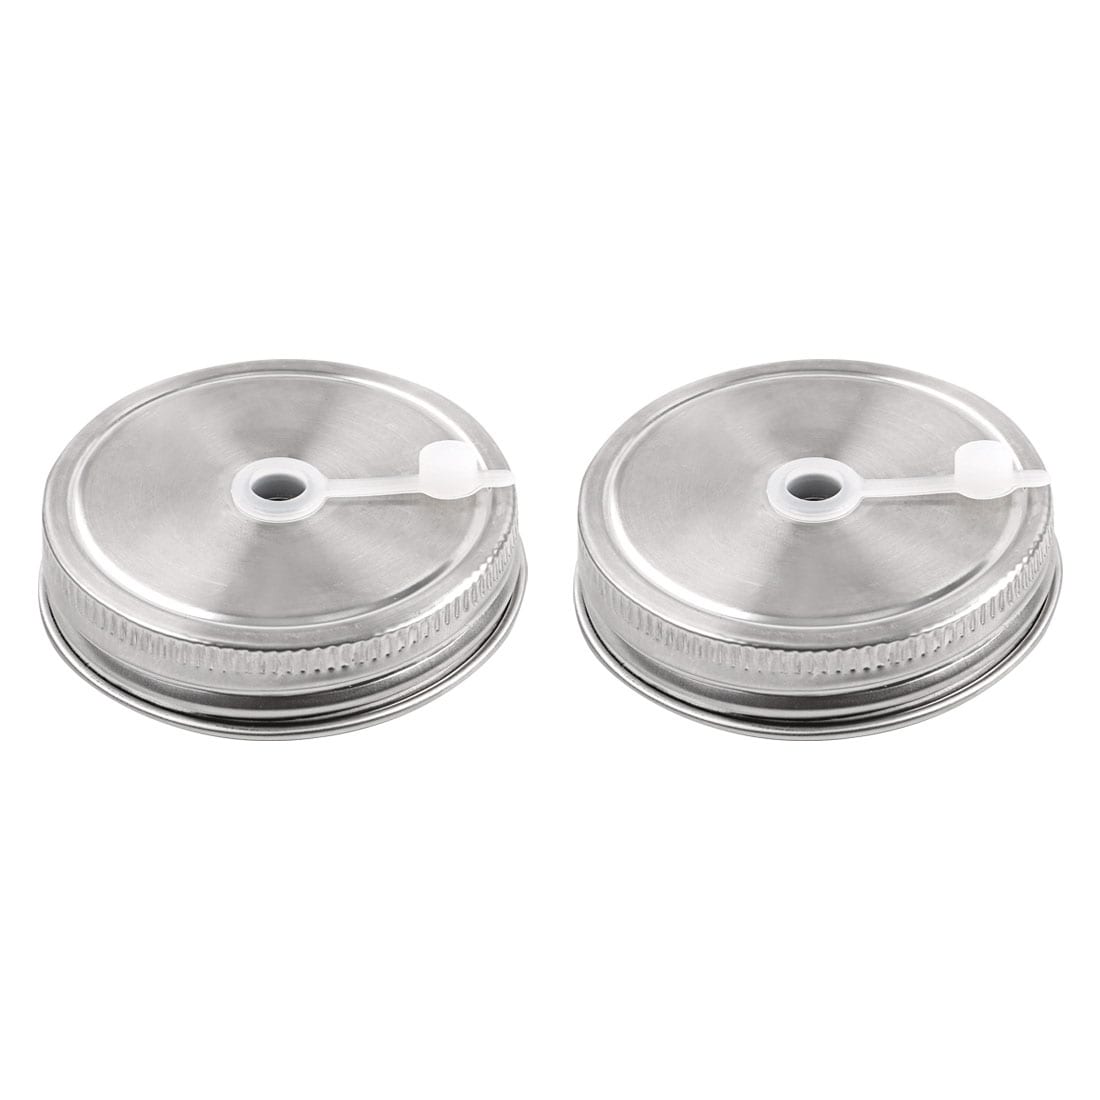 2pcs Stainless Steel Wide Mouth Mason Jar Lids with Straw Hole for Canning  Jar Caps Pink